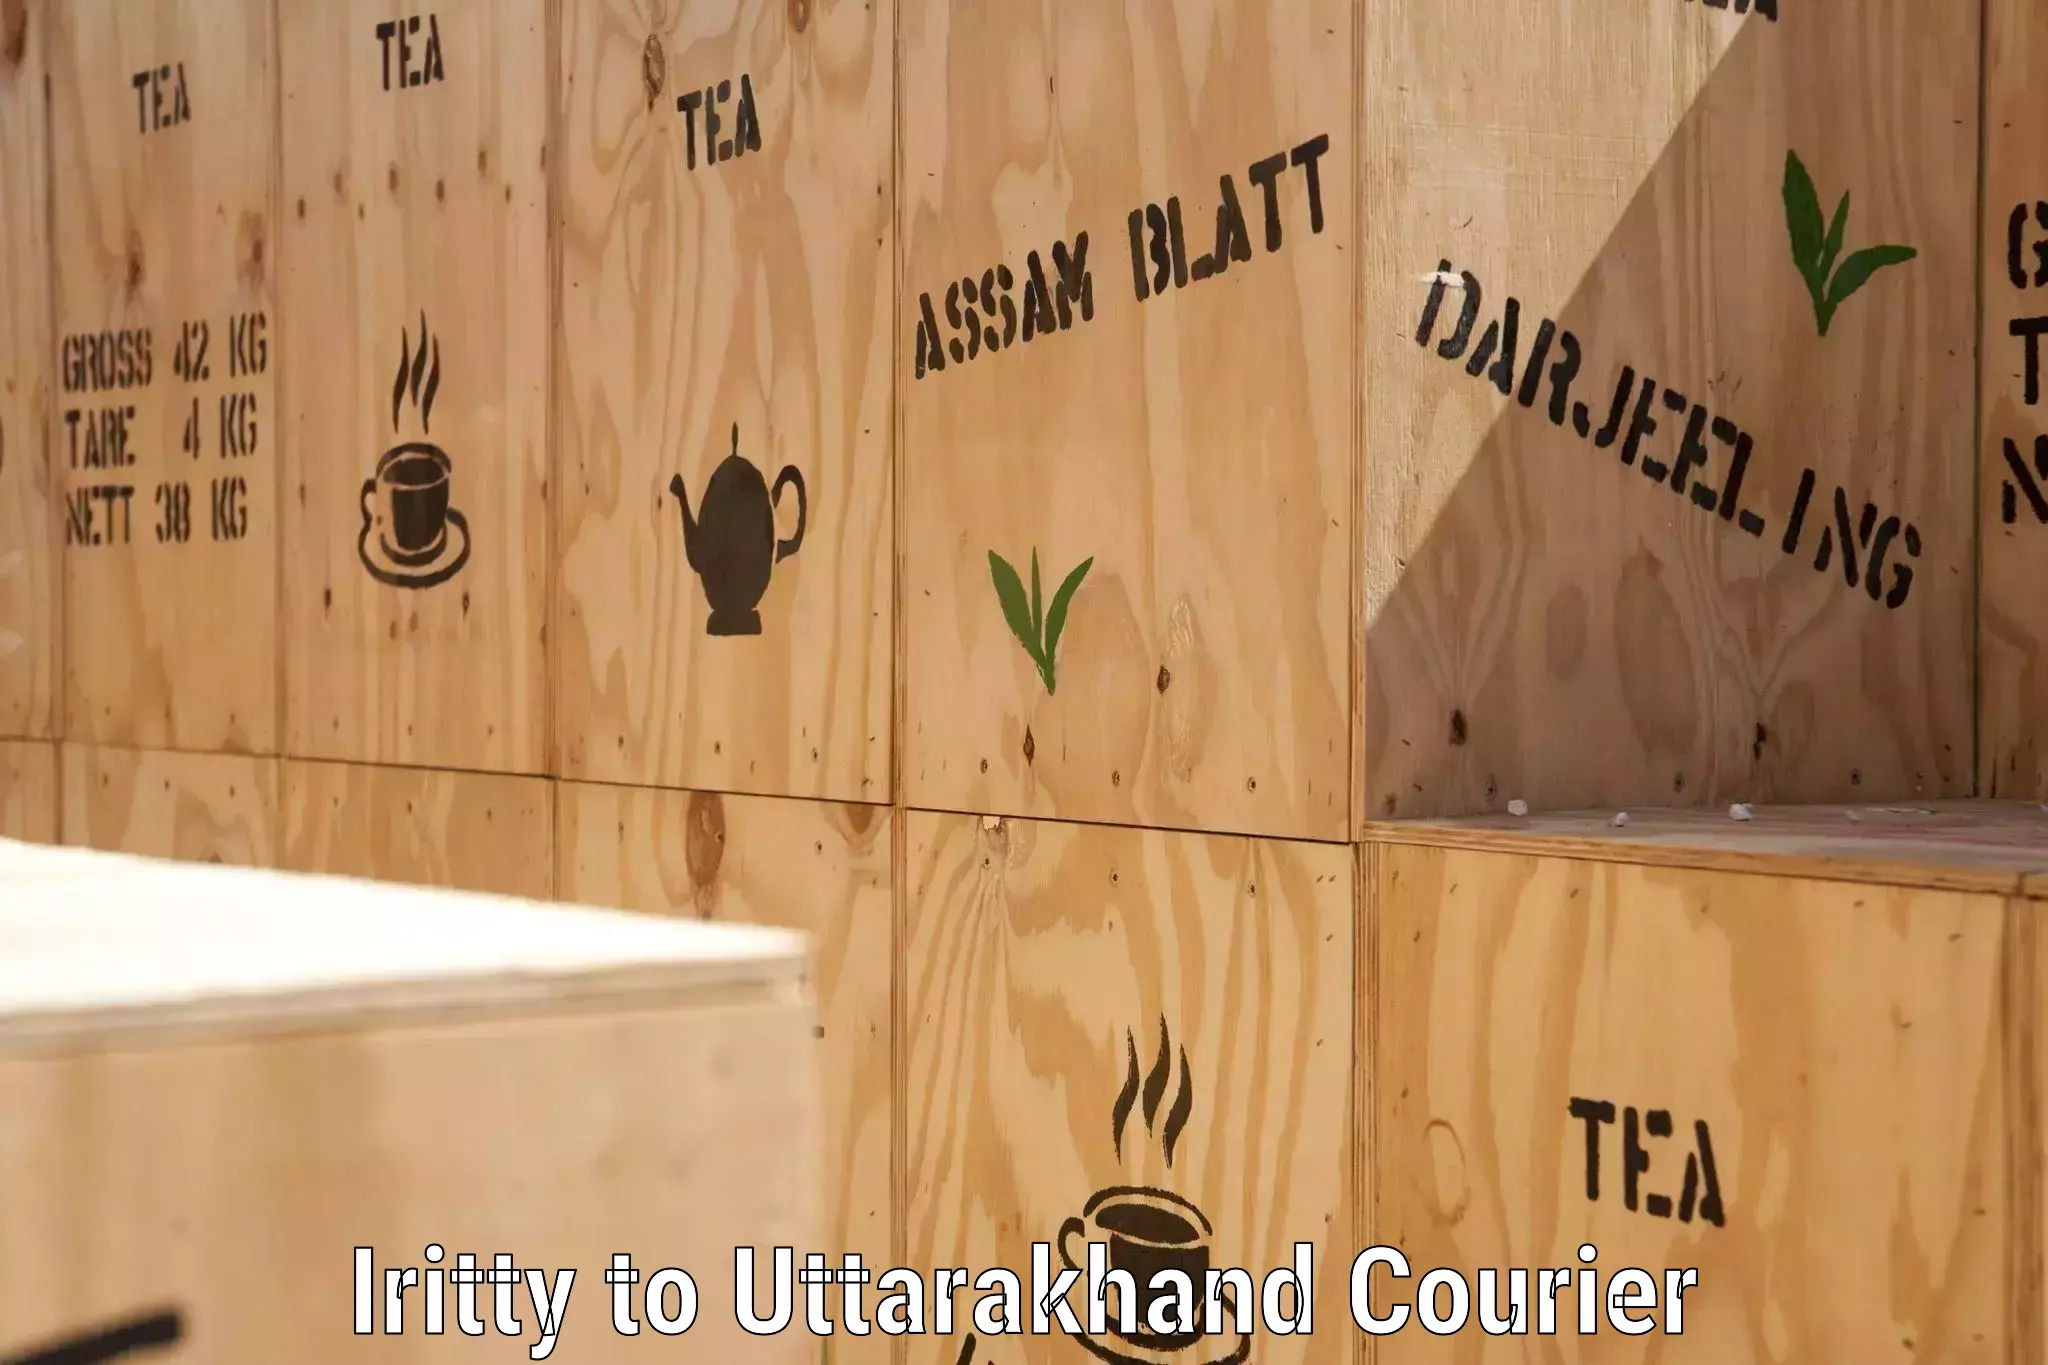 Local courier options Iritty to Uttarakhand